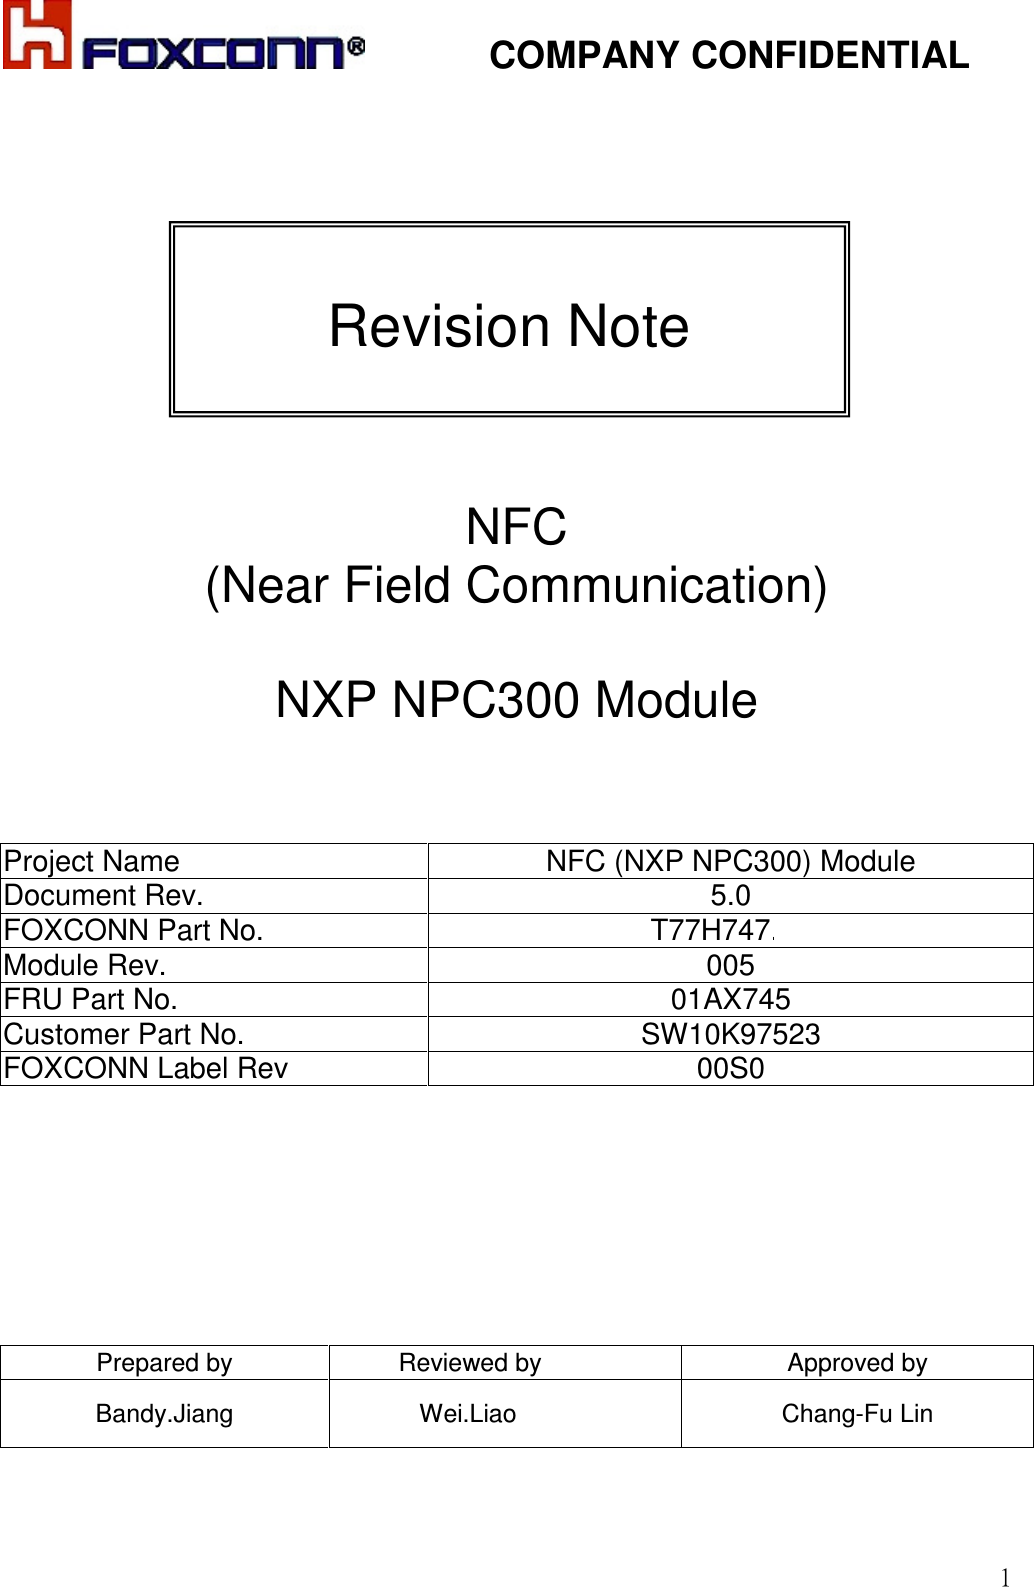            COMPANY CONFIDENTIAL  1           NFC (Near Field Communication)  NXP NPC300 Module    Project Name NFC (NXP NPC300) Module  Document Rev. 5.0 FOXCONN Part No. T77H747.10 Module Rev.  005 FRU Part No.  01AX745 Customer Part No.  SW10K97523 FOXCONN Label Rev  00S0        Prepared by  Reviewed by  Approved by Bandy.Jiang  Wei.Liao  Chang-Fu Lin    Revision Note  